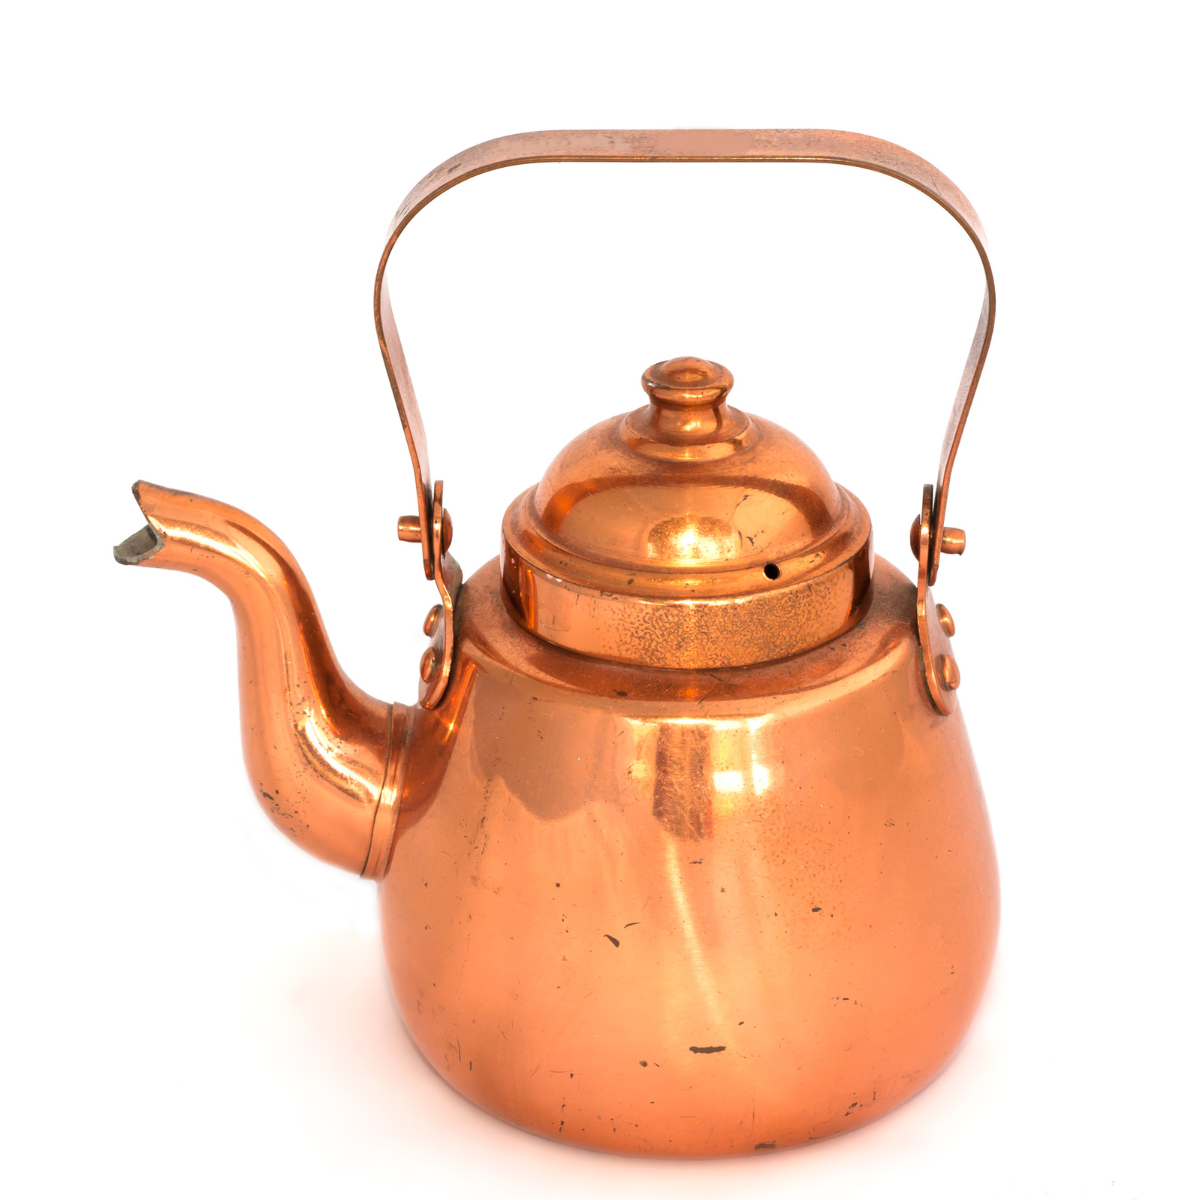 33. Timeless Elegance: Antique Copper Teapot, the Perfect 8th Anniversary Gift for Tea Lovers